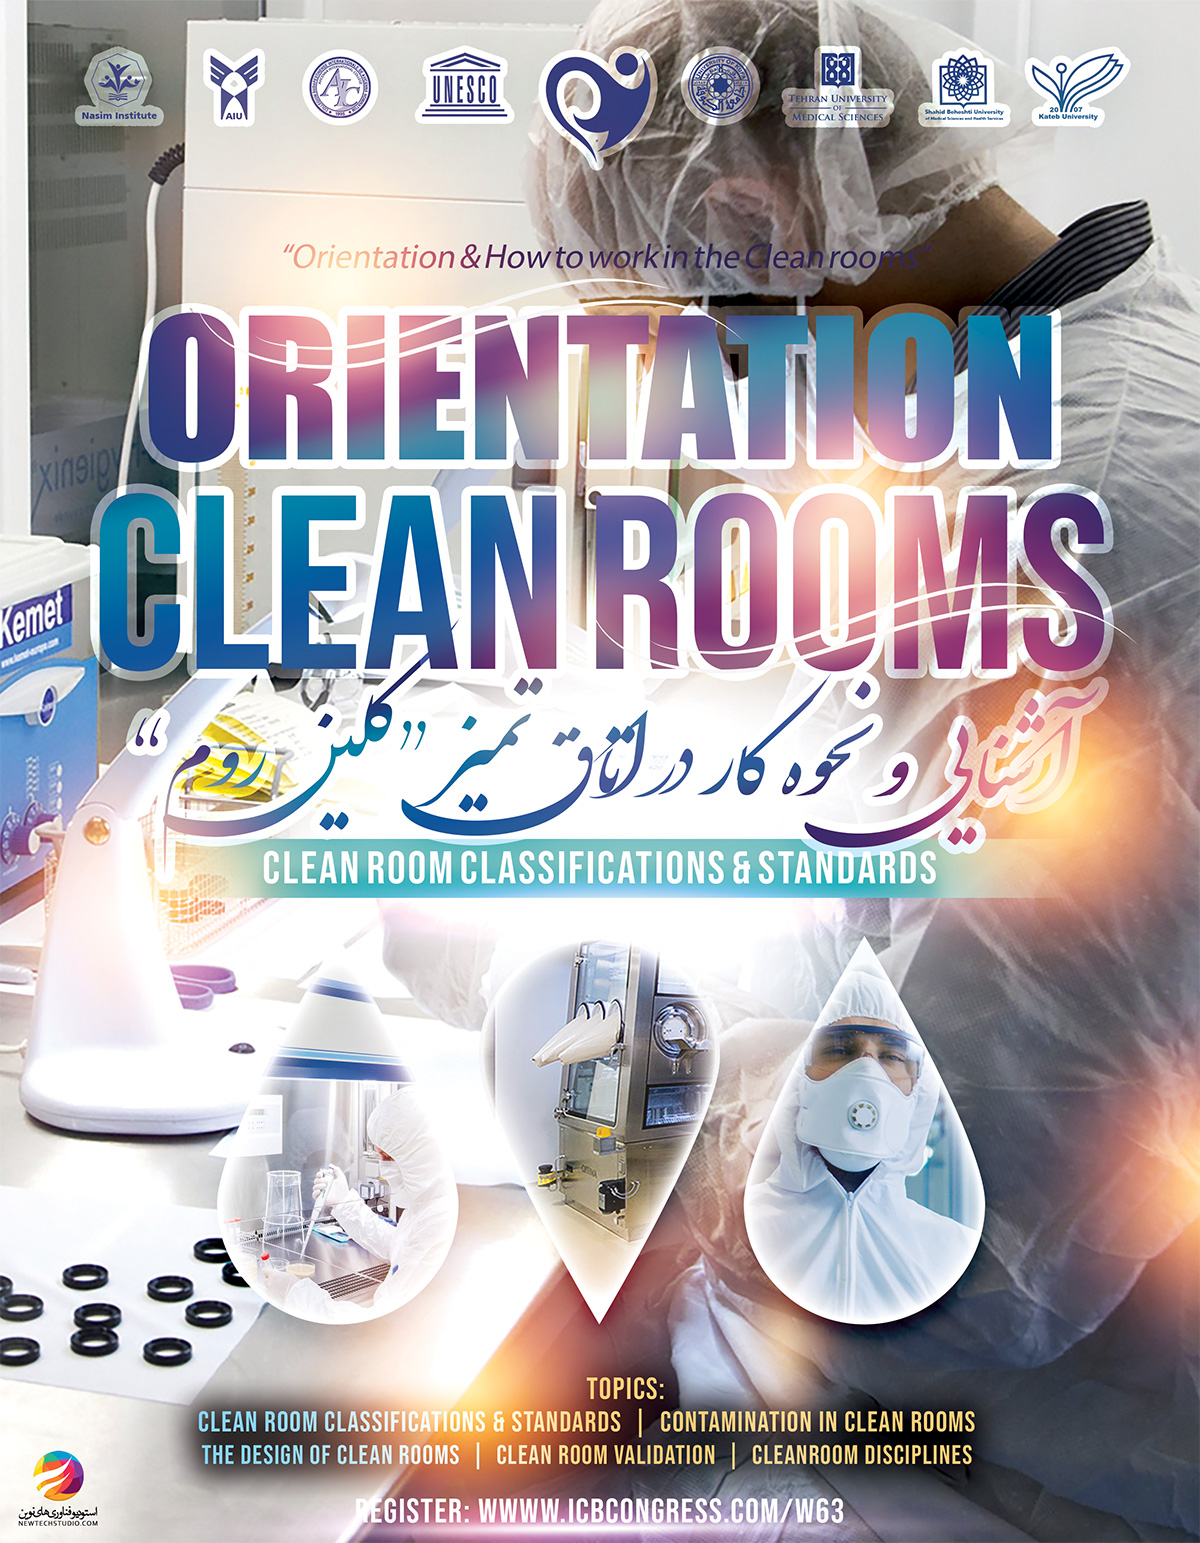 Orientation & How to work in the Clean rooms